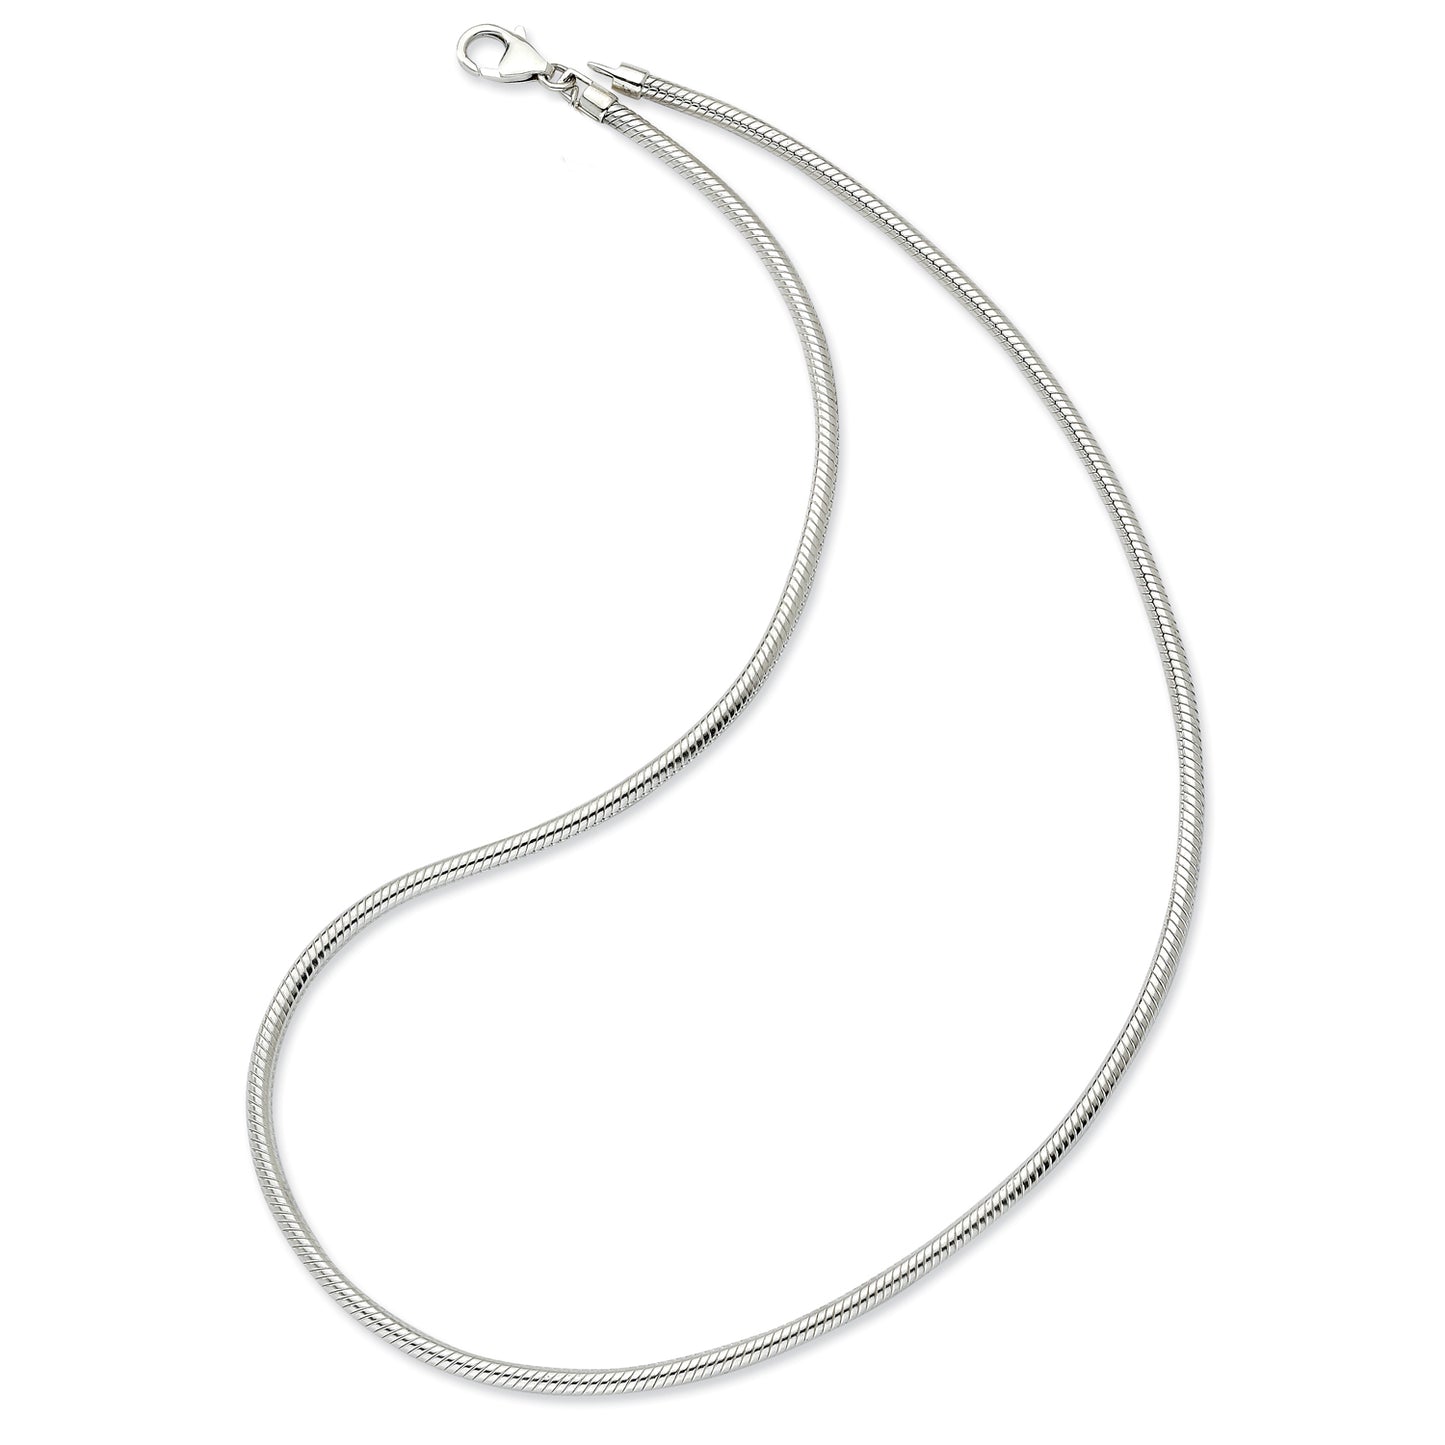 Silver Plated Polished Lobster Clasp Snake Chain Necklace (3mm) - 18"